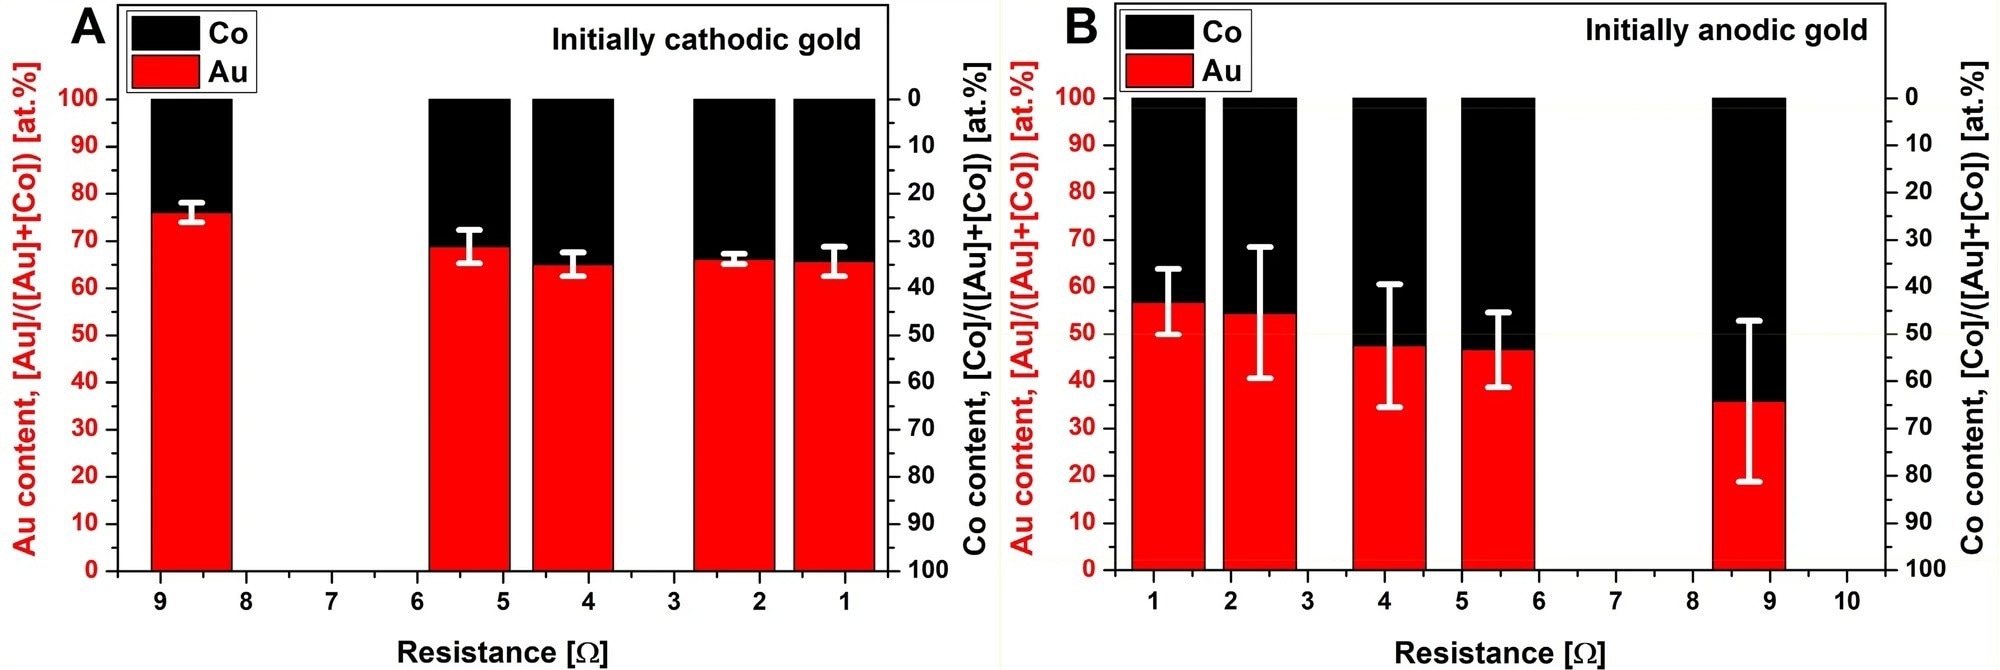 Variation of the composition of the Au/Co/CoO NPs obtained by ICP-MS, as a function of the total resistance of the discharge circuit when gold is initially cathodic (A) and anodic (B). Error bars indicate the uncertainty of the composition corresponding to a 90% confidence level.